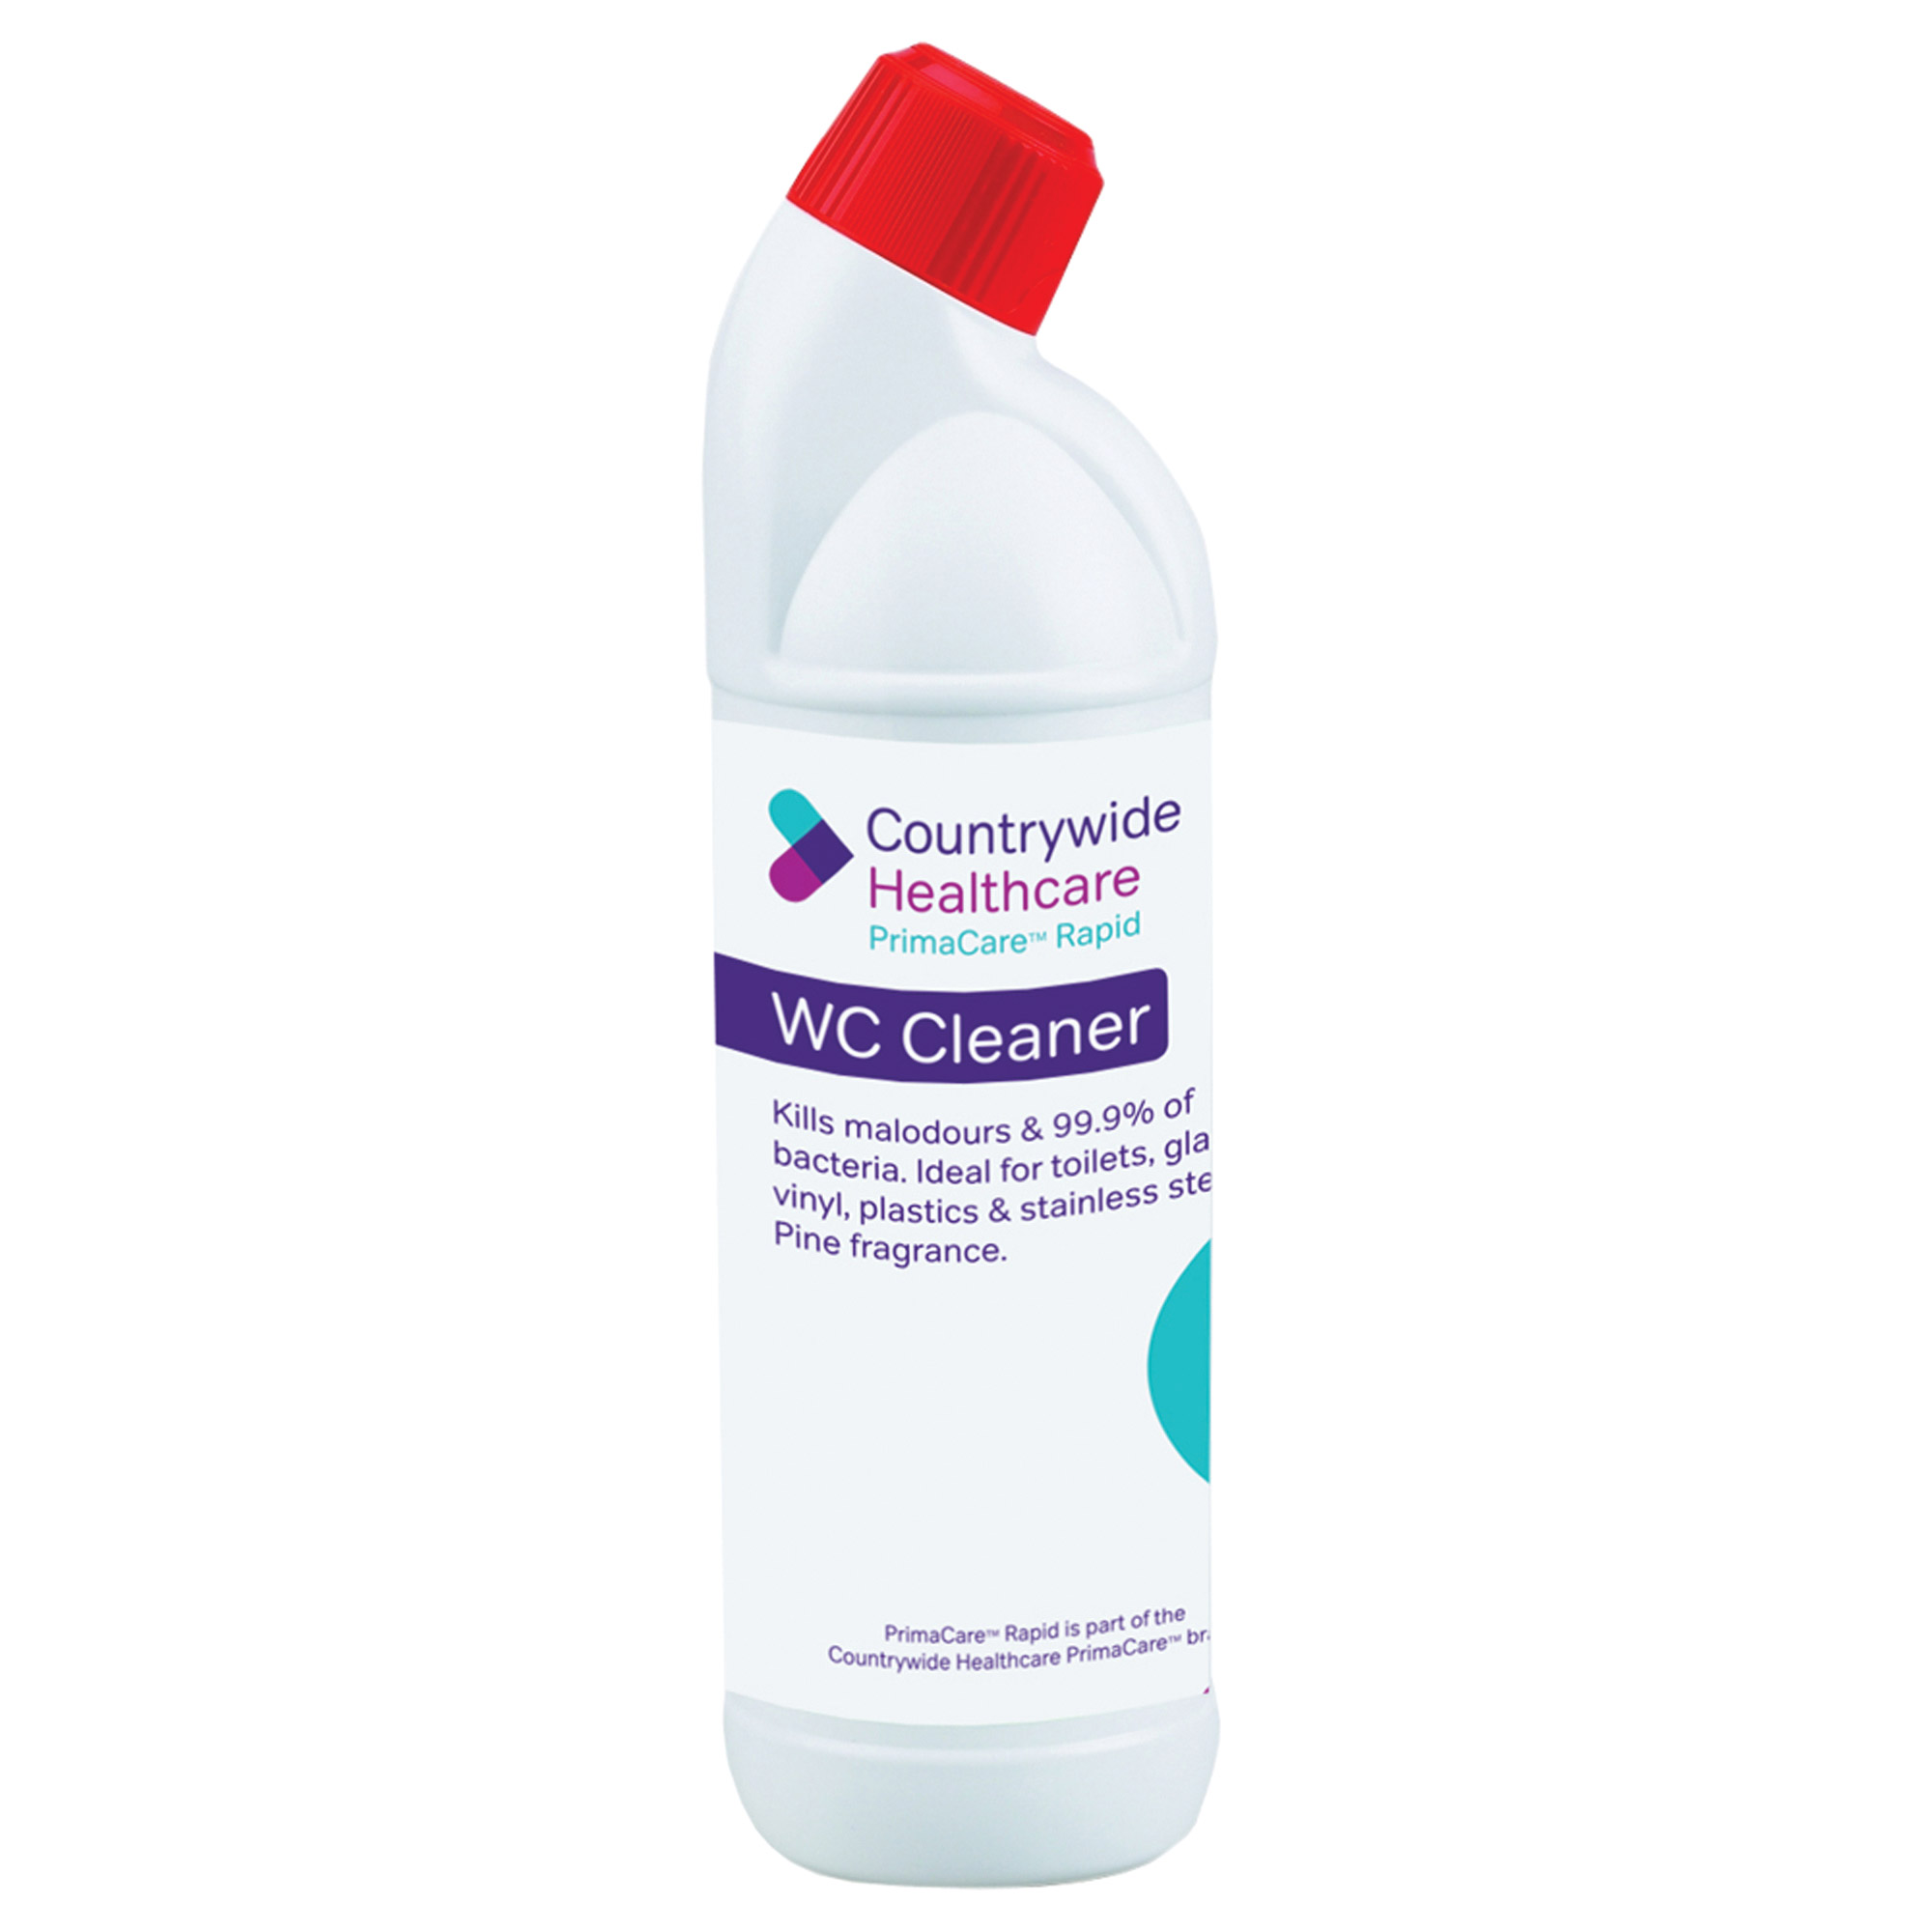 PrimaCare Rapid WC Cleaner 1 litre - Each